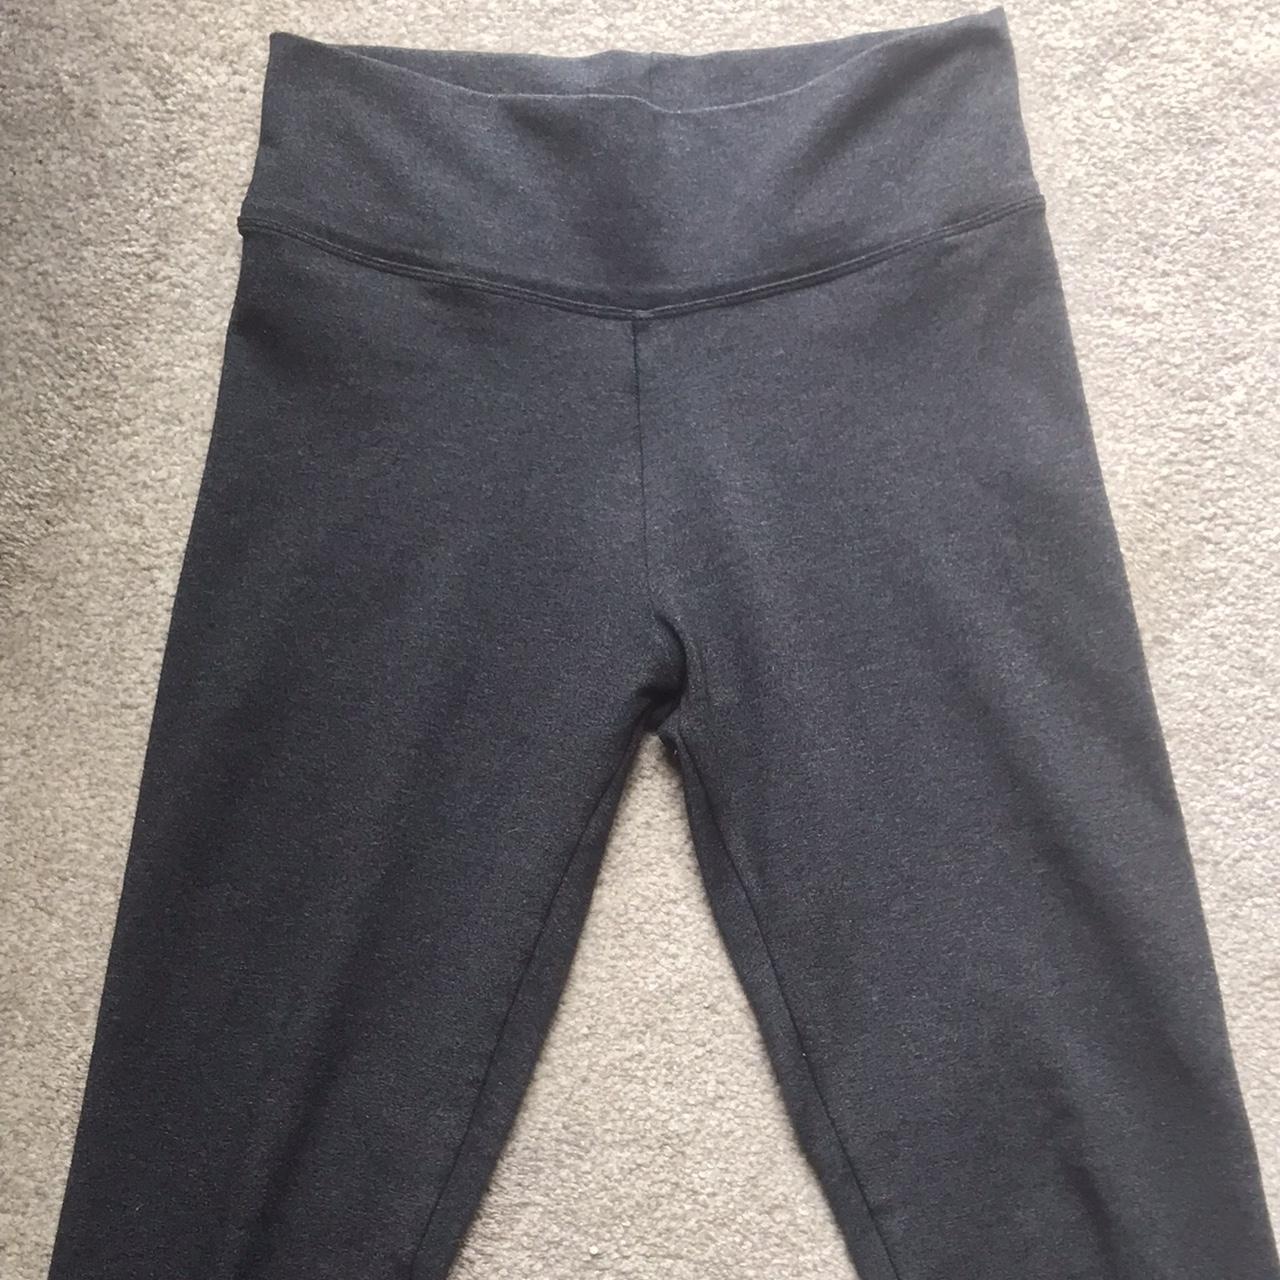 grey gym legging in size s (says p because it is... - Depop